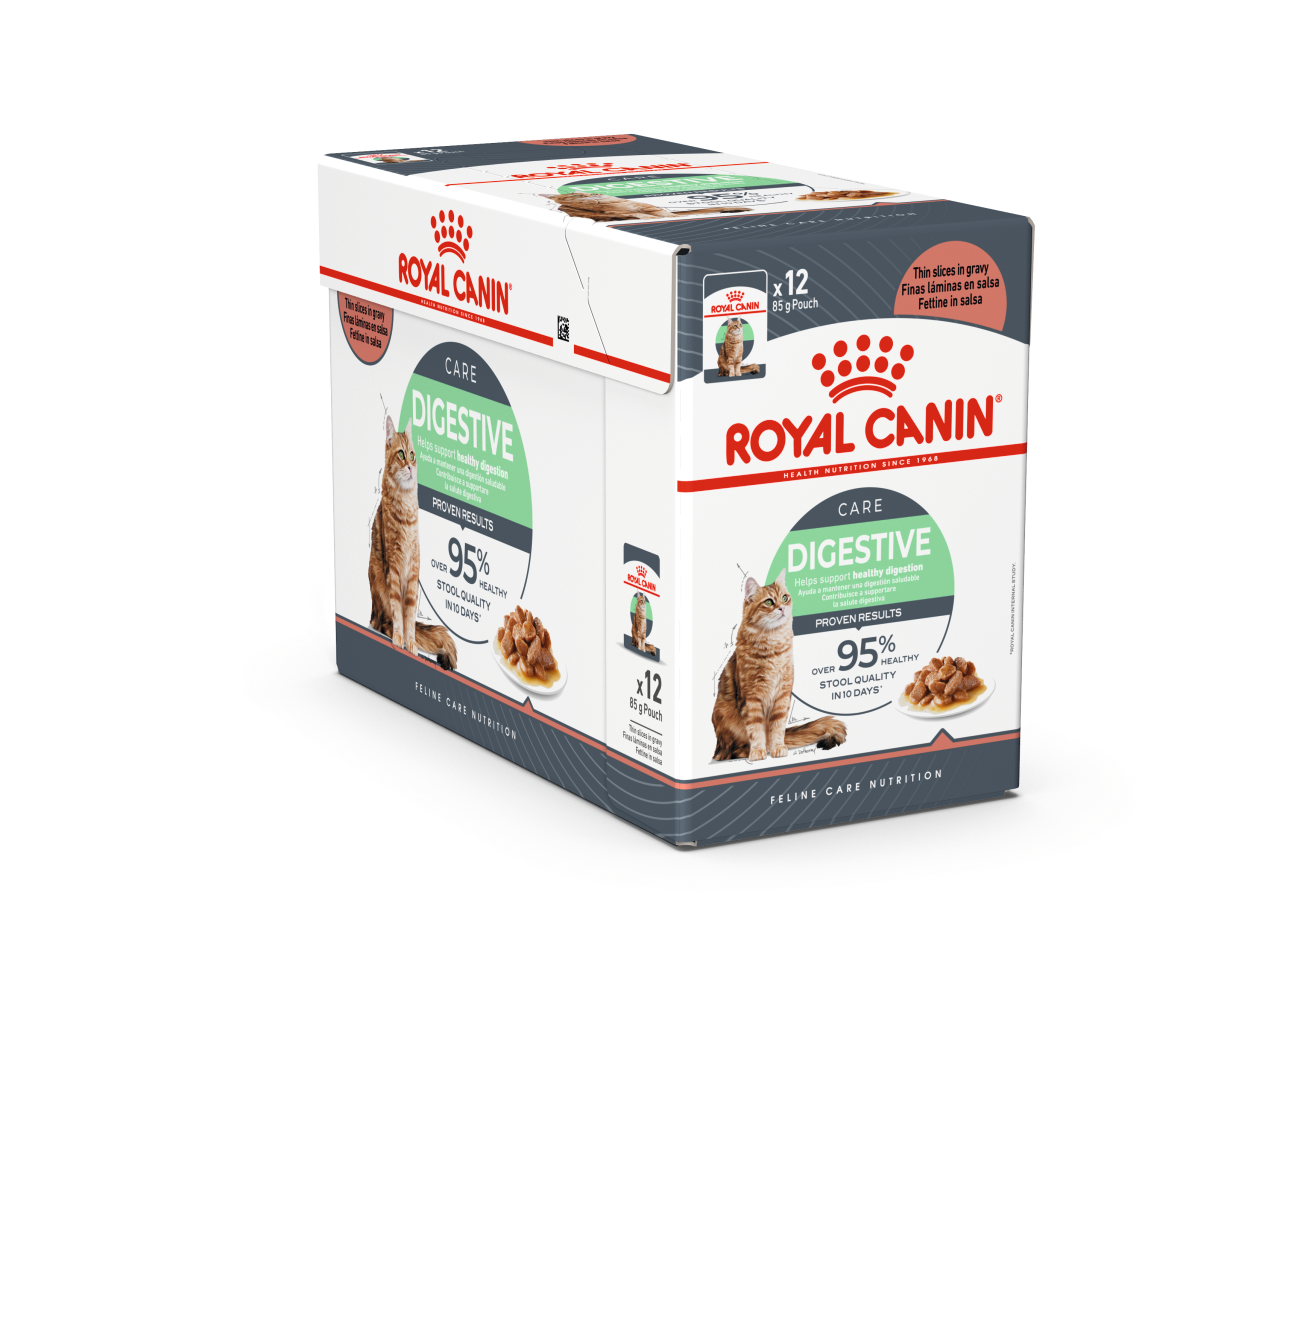 Royal Canin Cat Urinary S/O Nourriture sèche pour chats